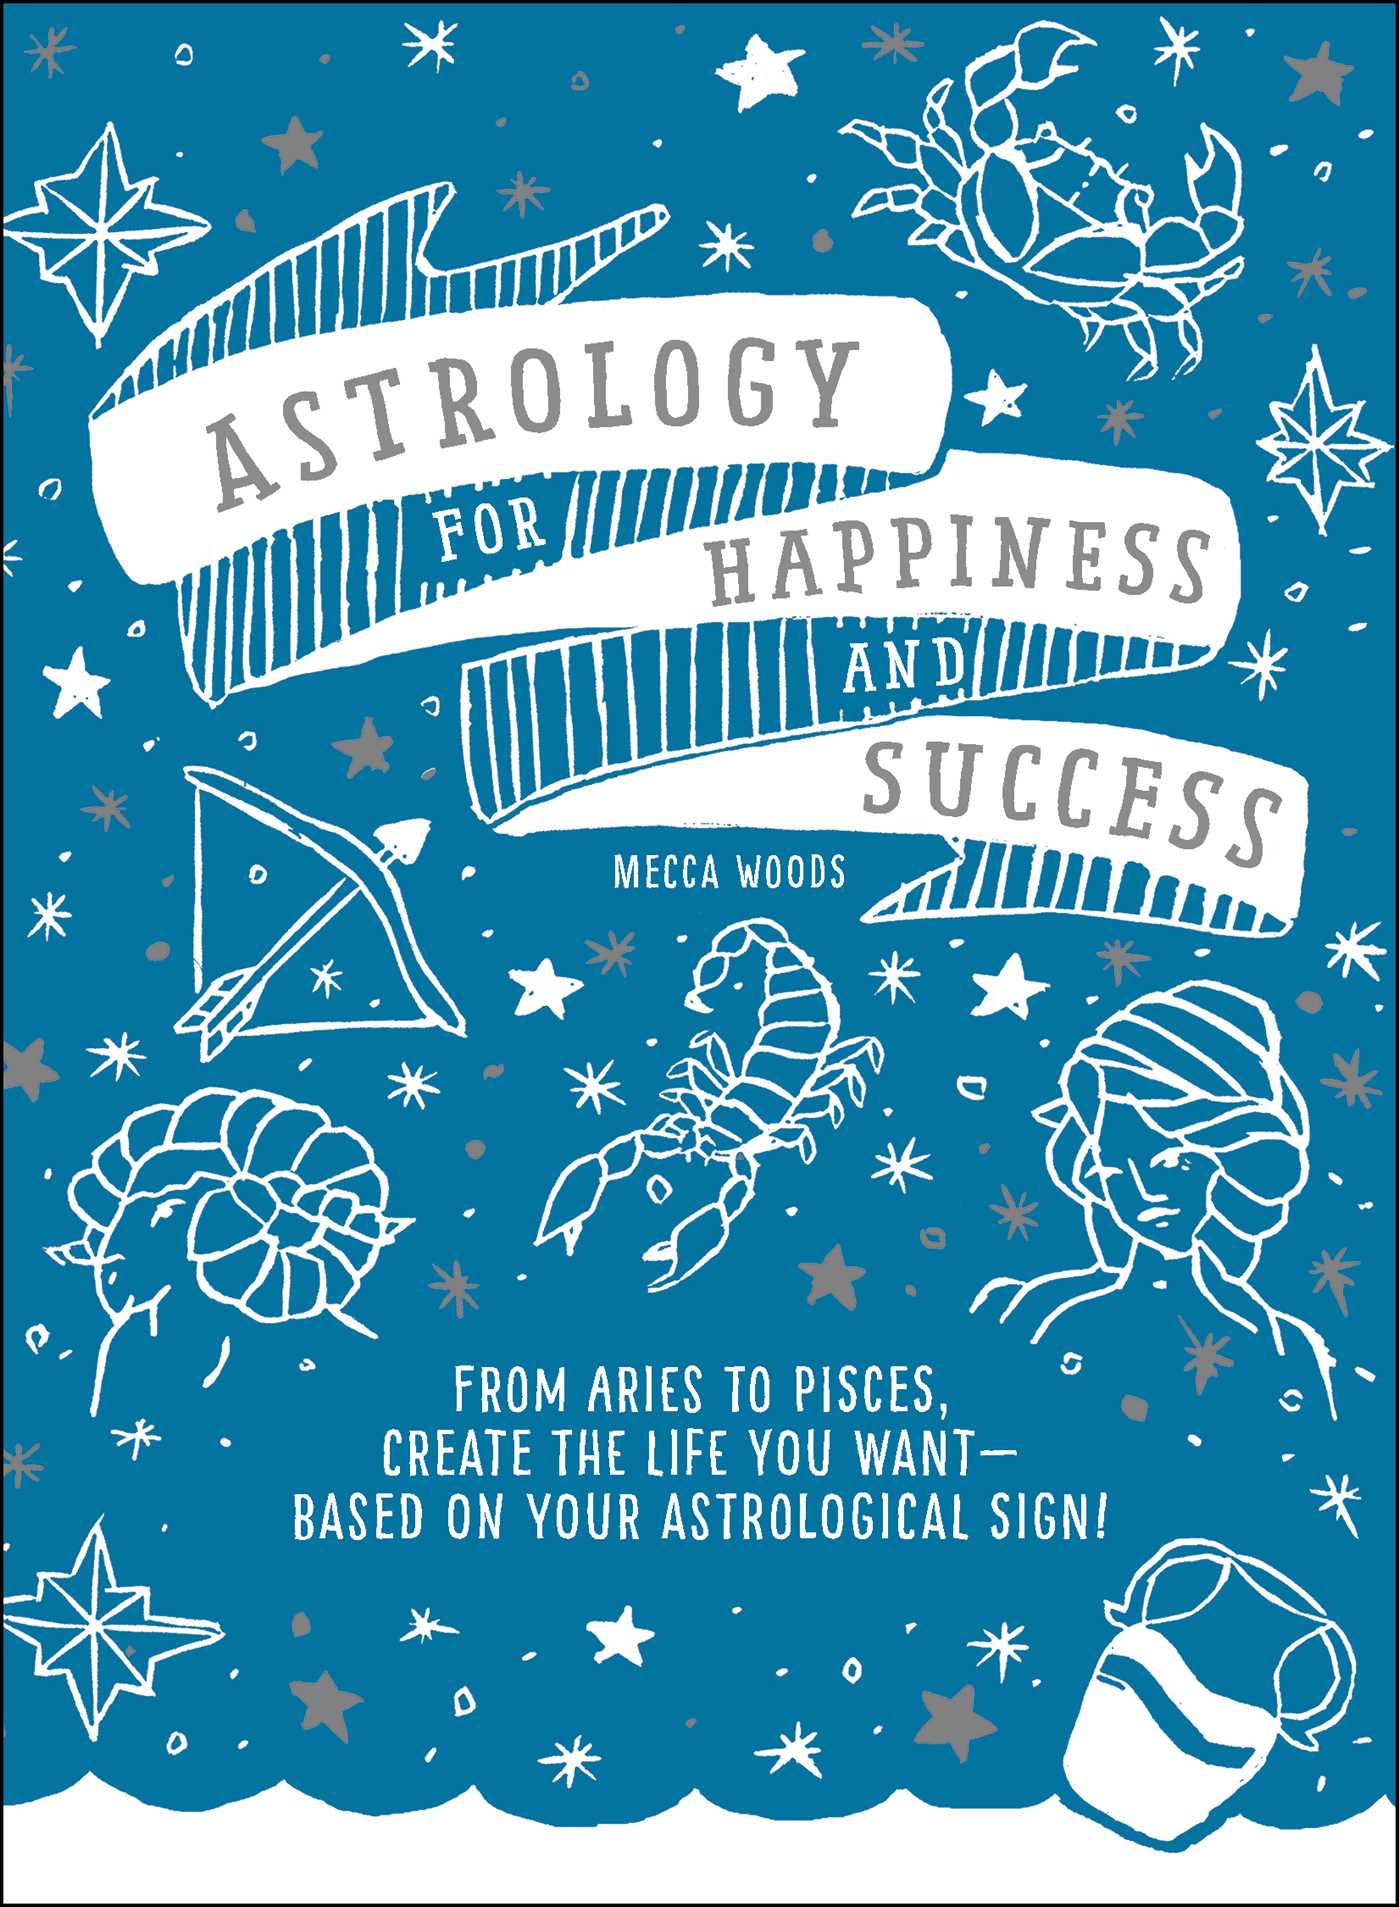 Astrology for Happiness and Success // From Aries to Pisces, Create the Life You Want--Based on Your Astrological Sign!